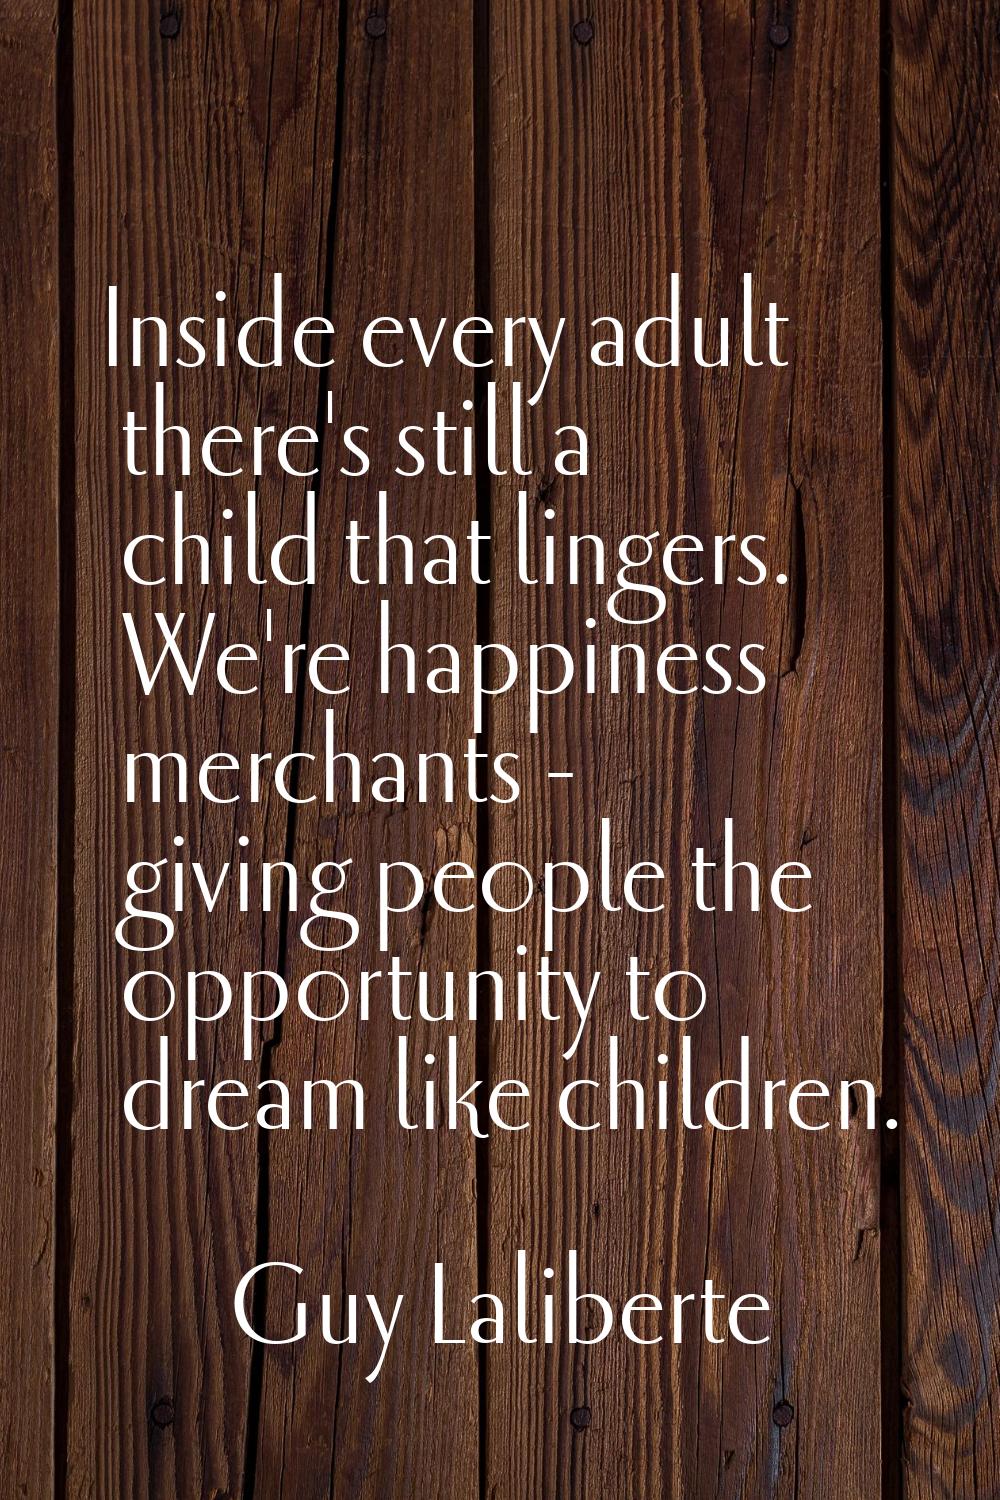 Inside every adult there's still a child that lingers. We're happiness merchants - giving people th